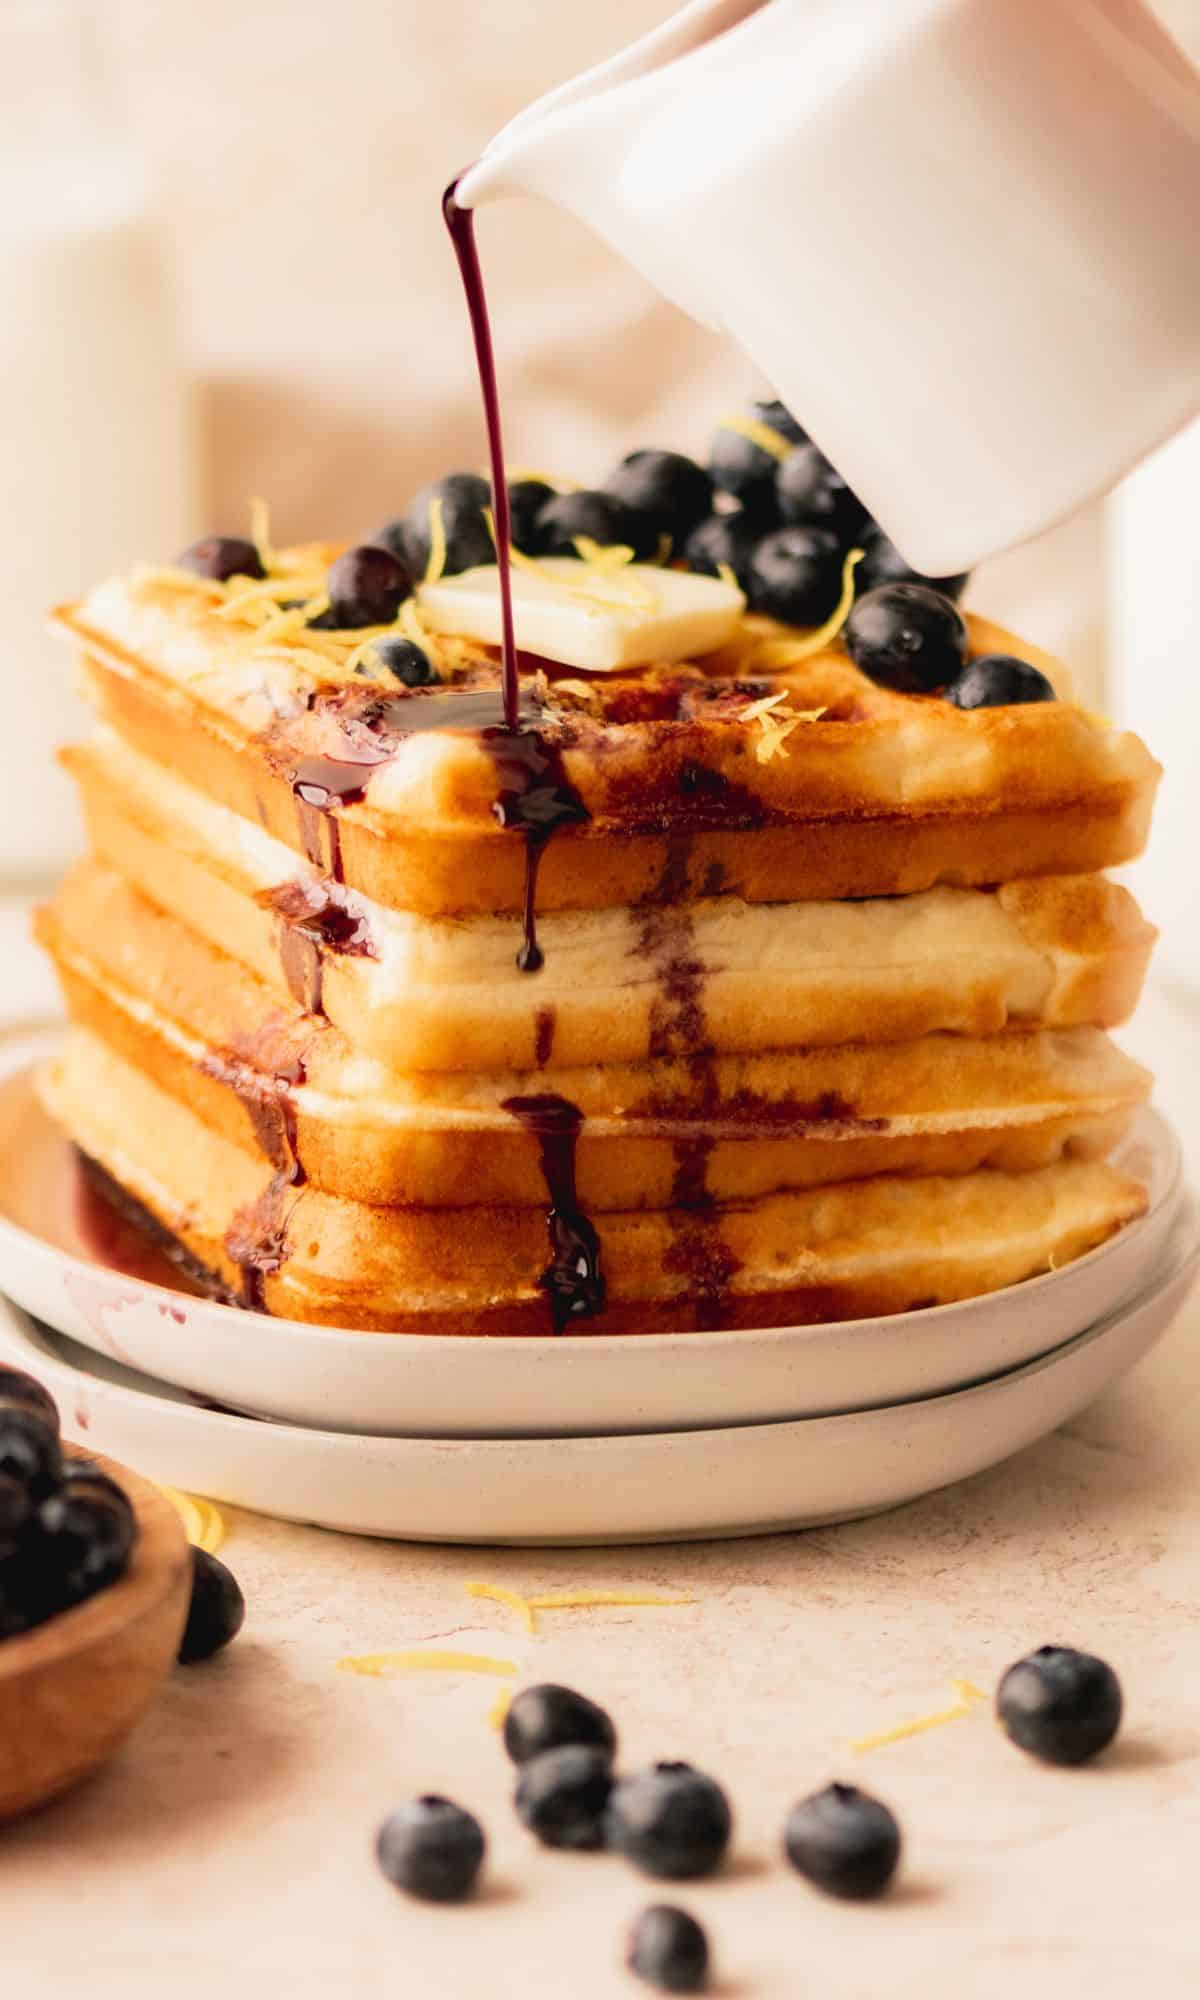 A stack of lemon waffles getting a drizzle of blueberry syrup.